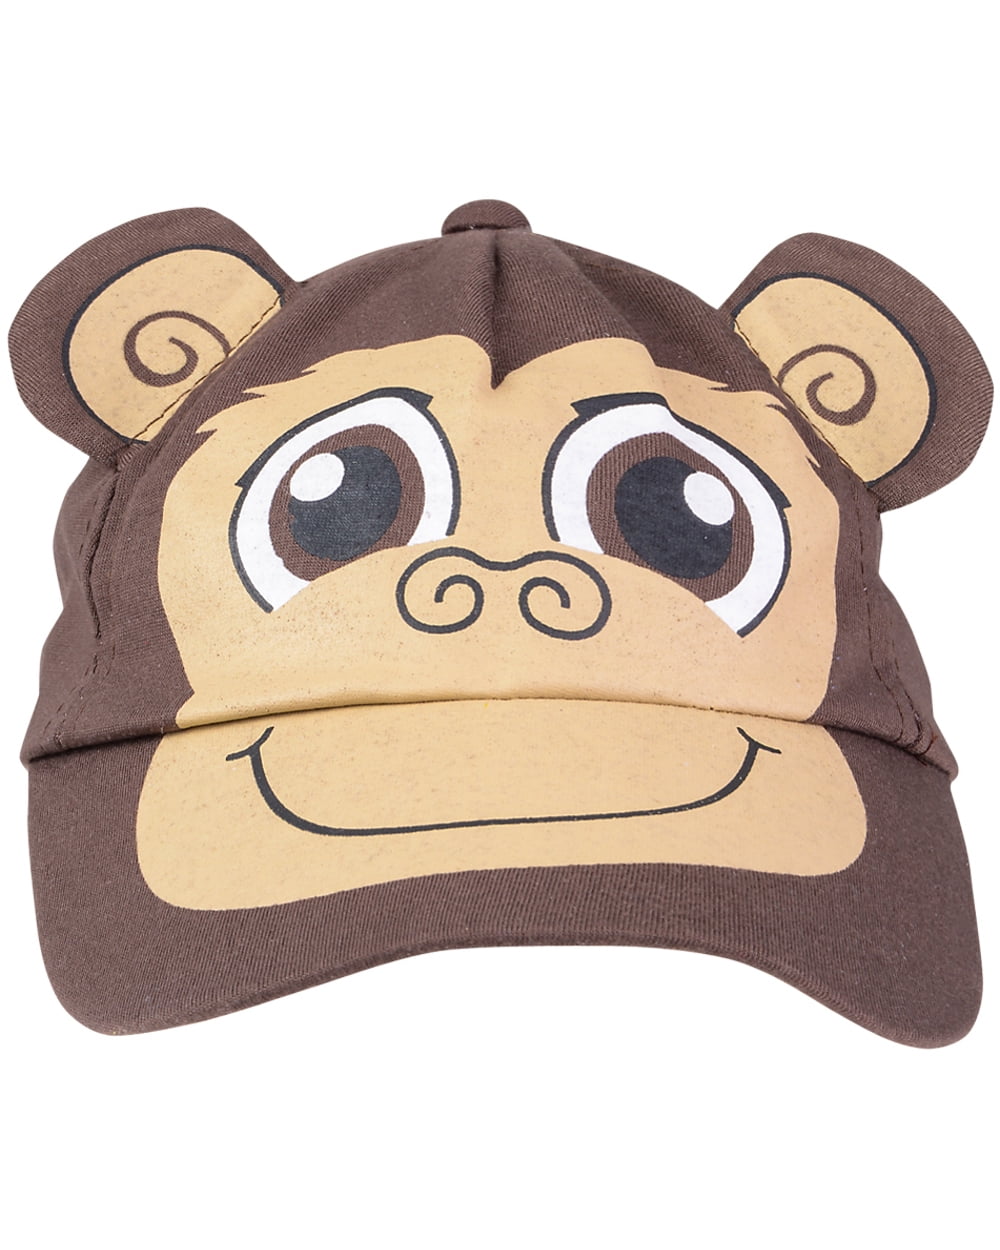 KIDS CHILDRENS RED MONKEY ANIMAL WITH EARS BASEBALL CAP HAT-CUTE-FUNNY COSTUME 